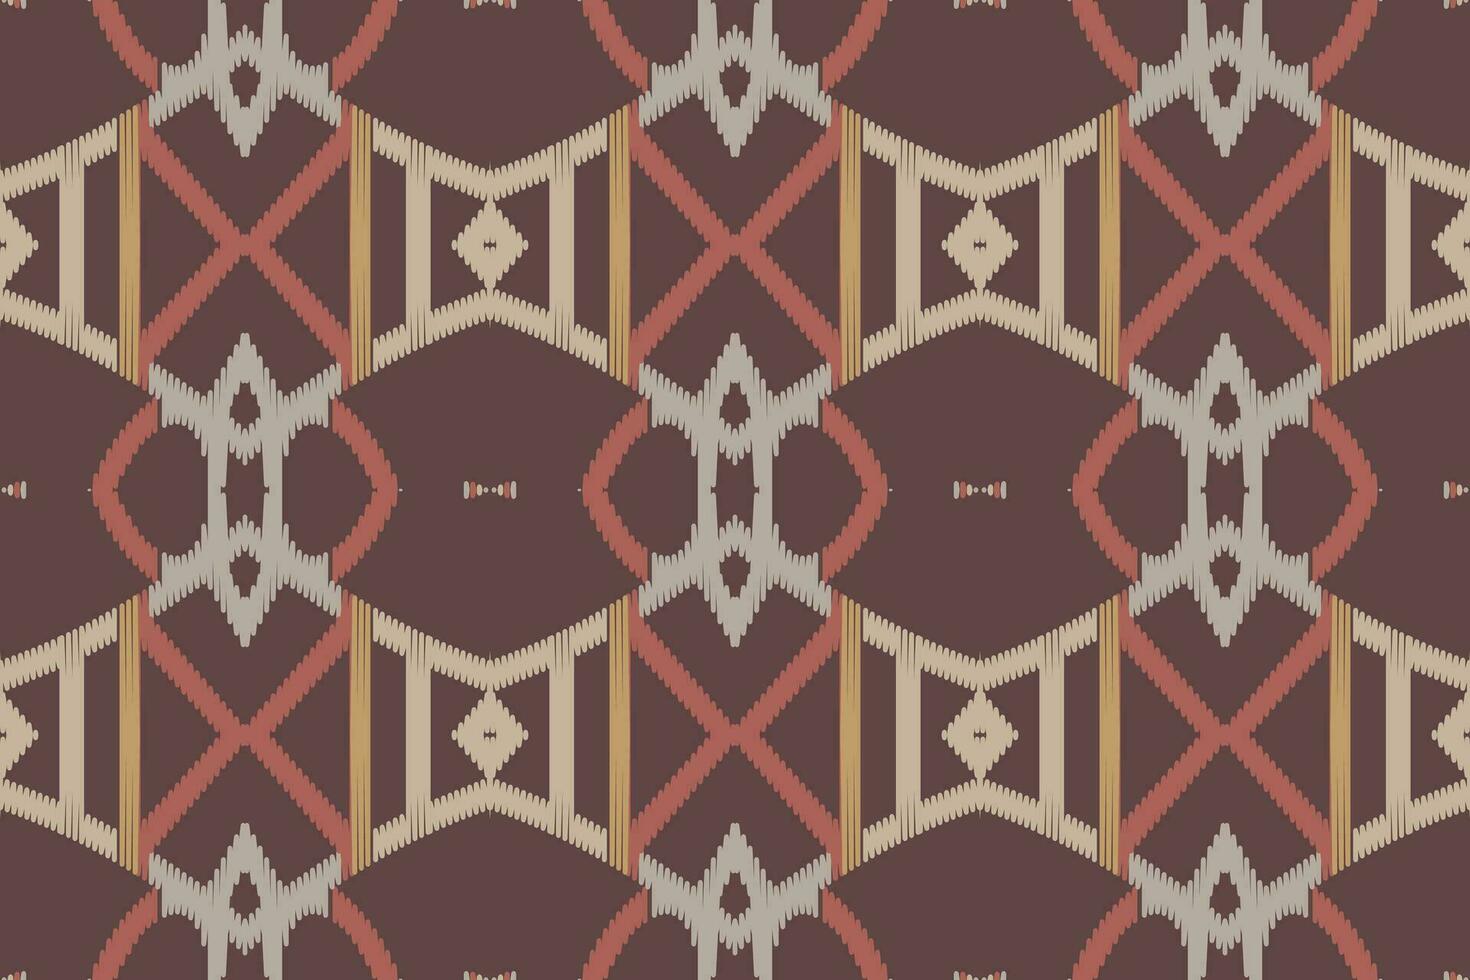 Motif Ikat Seamless Pattern Embroidery Background. Ikat Vector Geometric Ethnic Oriental Pattern traditional.aztec Style Abstract Vector design for Texture,fabric,clothing,wrapping,sarong.